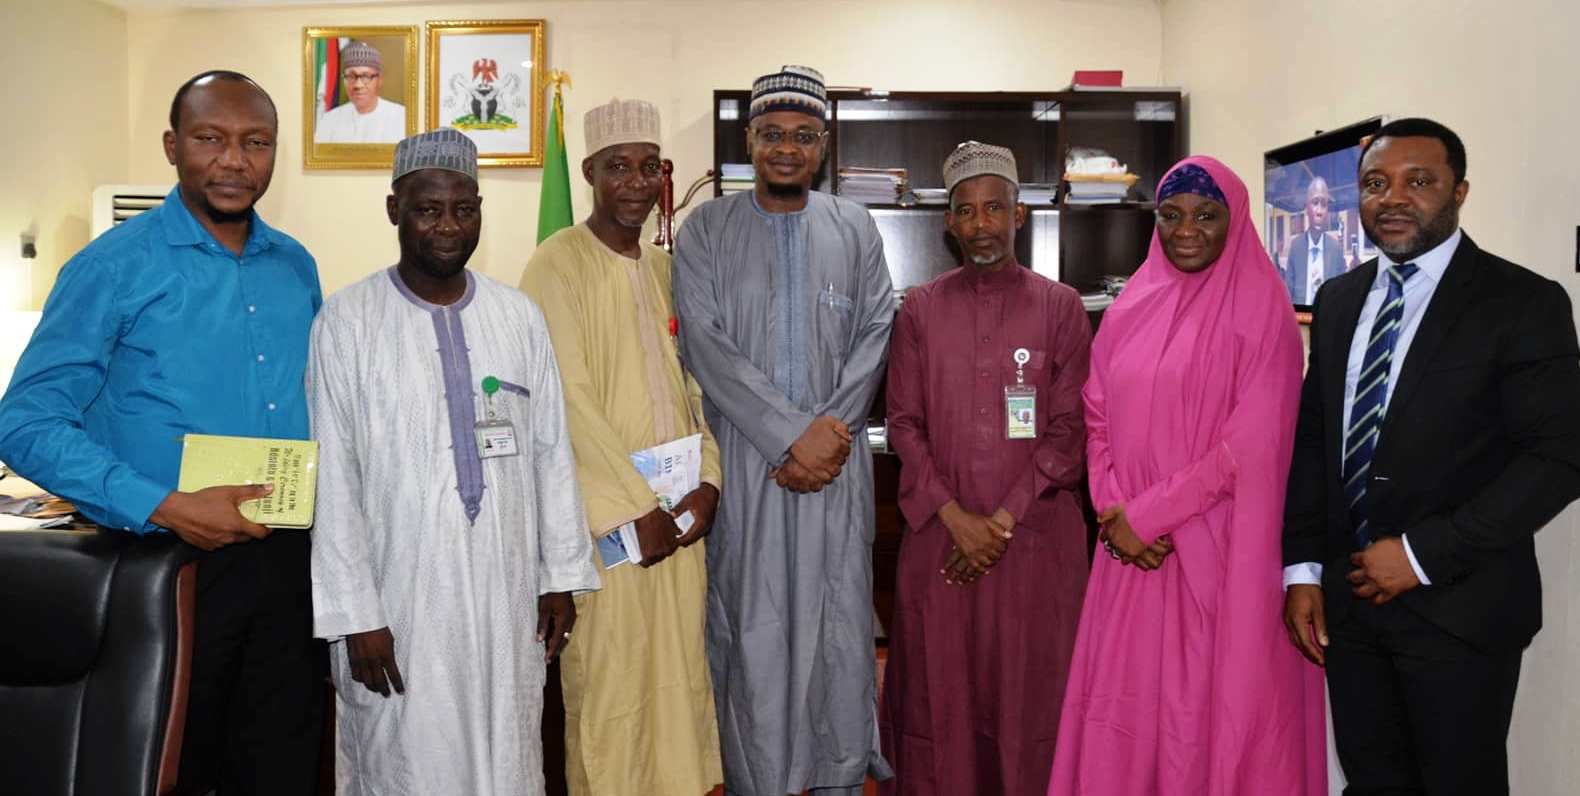 Sustainability plan vital to getting government support, says NITDA’s boss